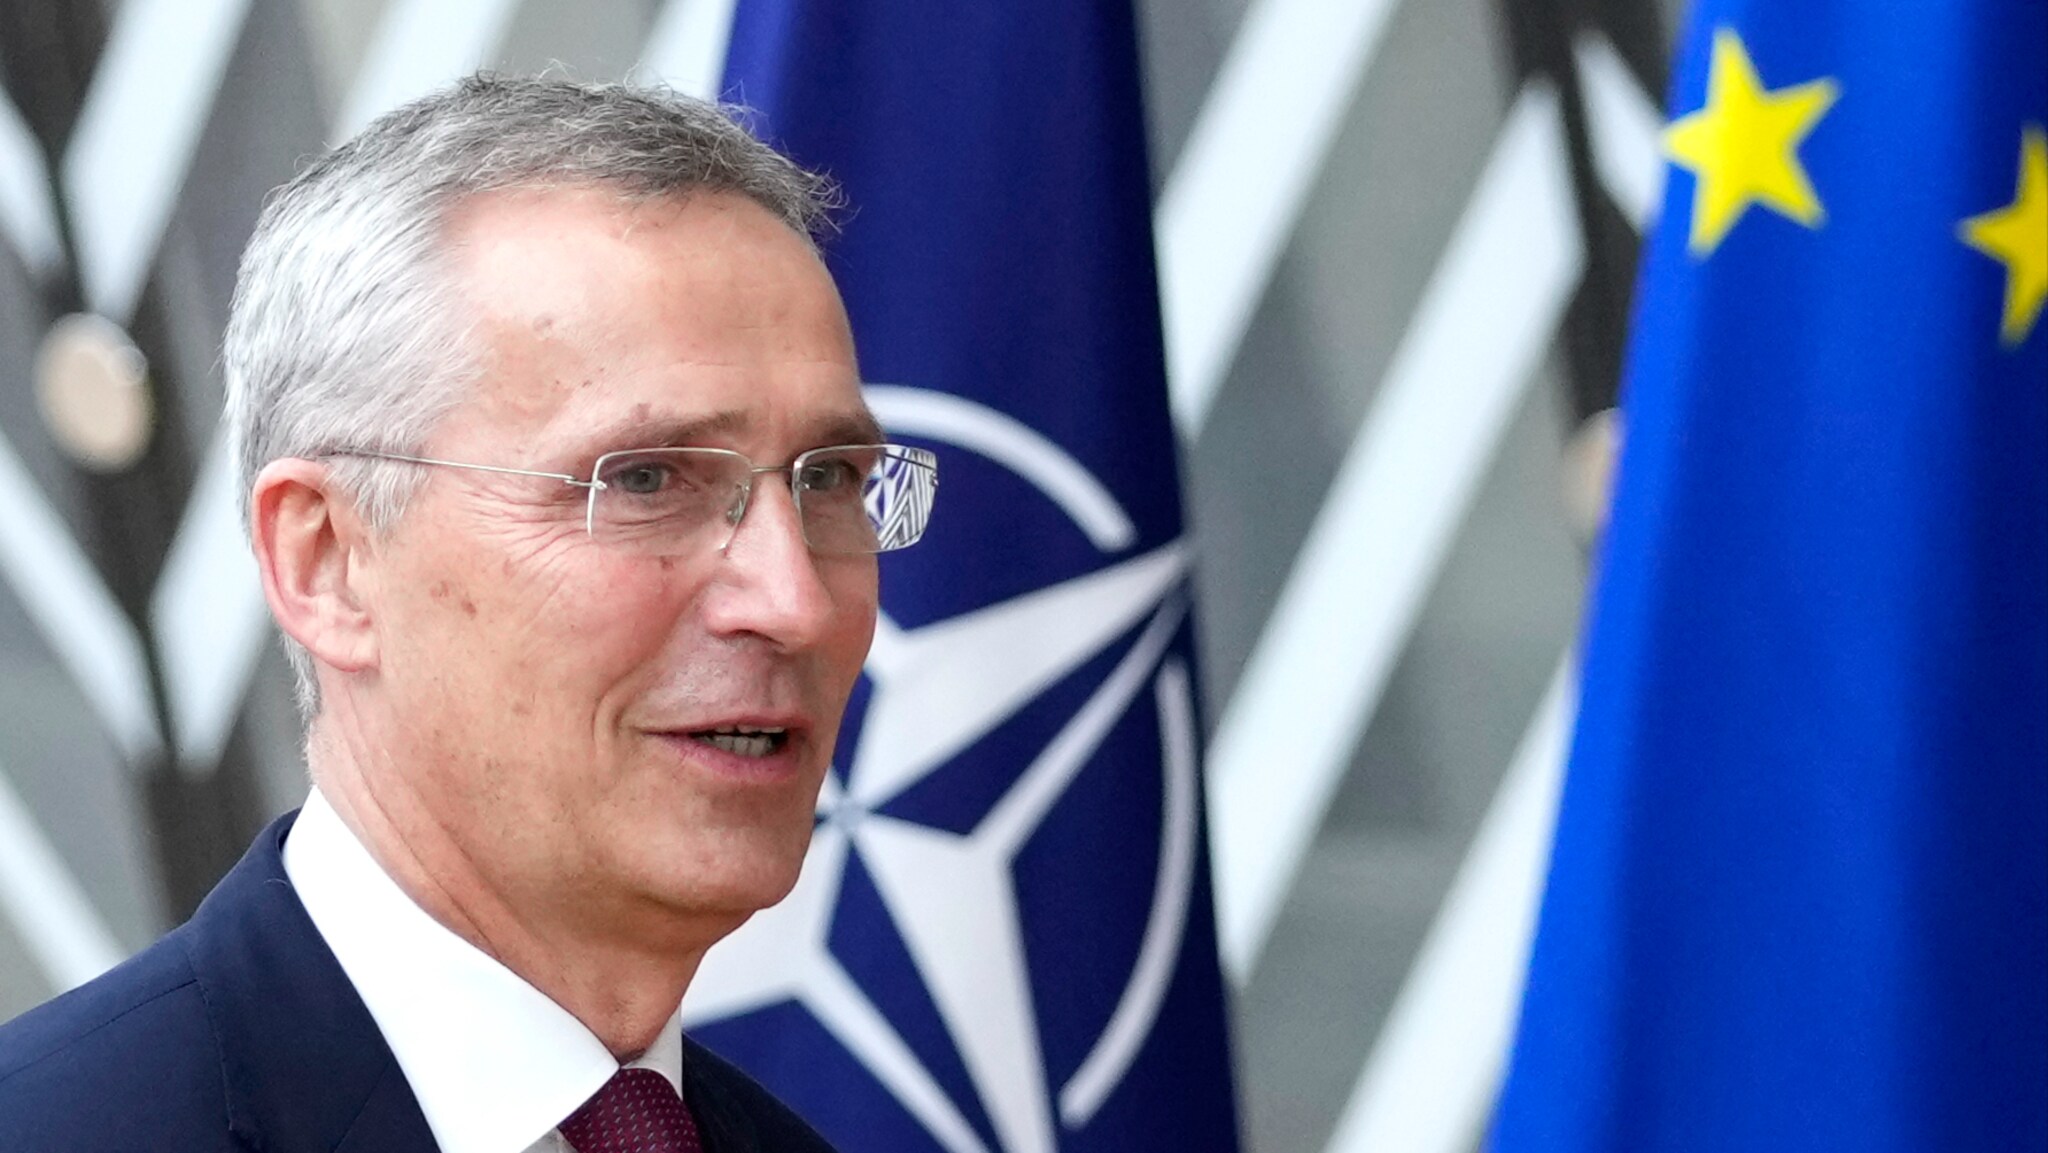 Another year for Stoltenberg in NATO: “I’m honored”